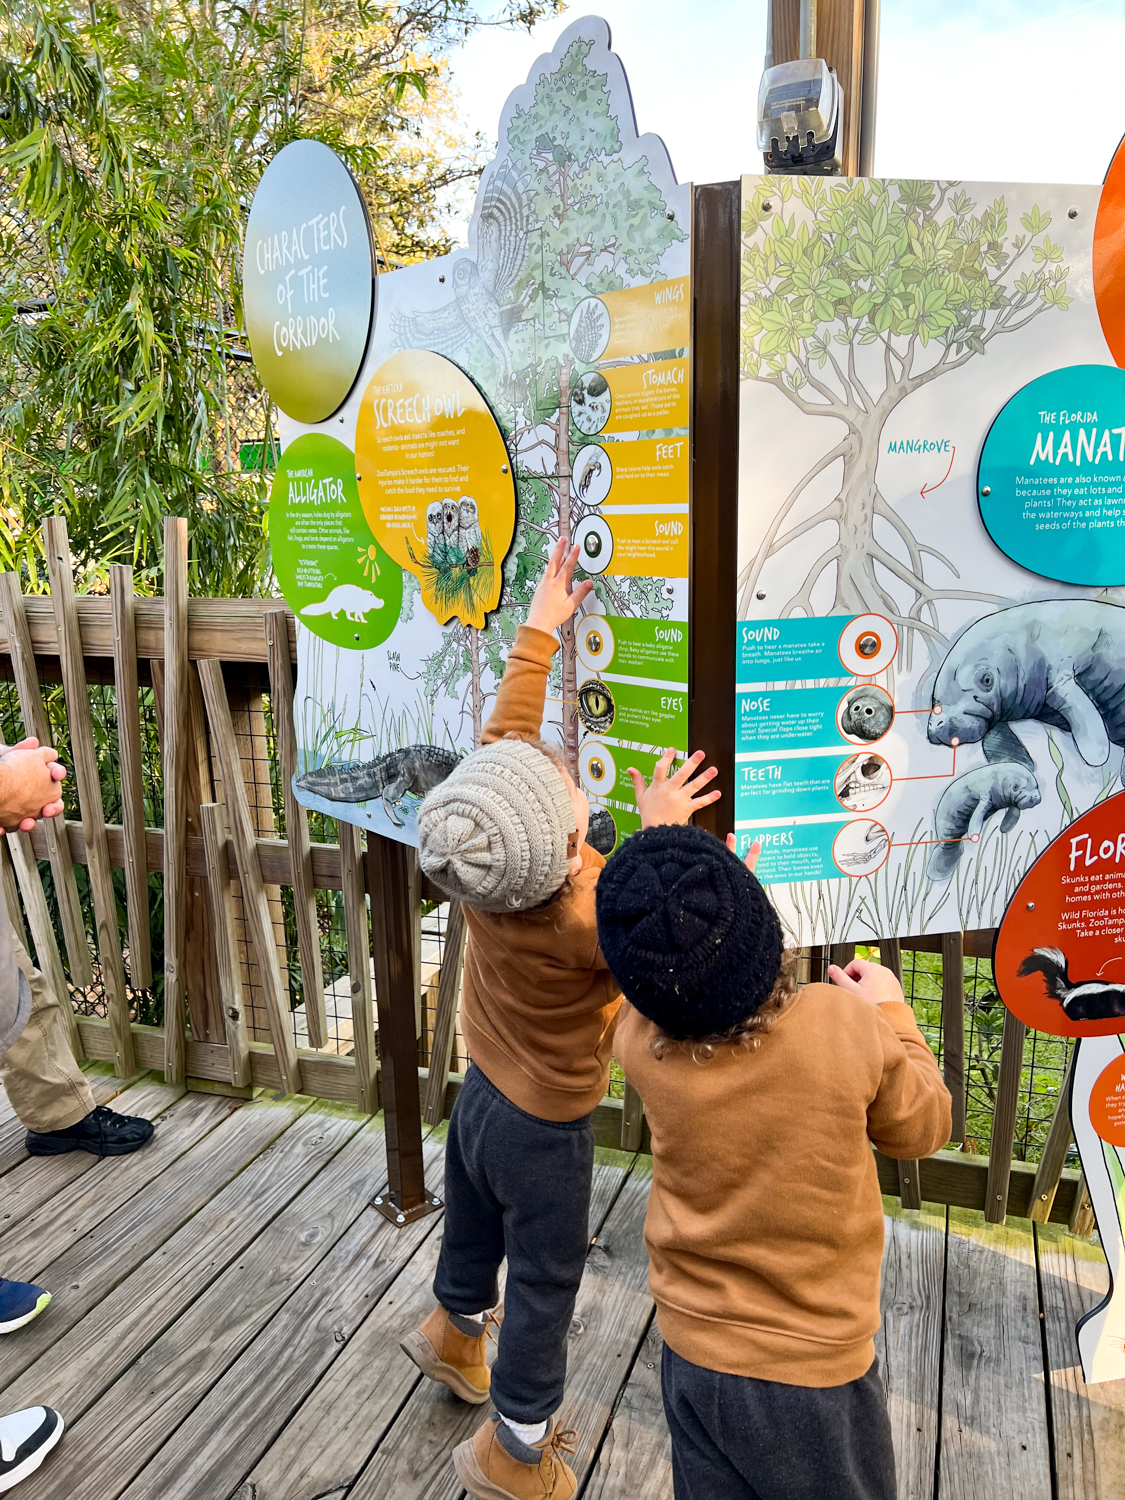 The Florida Wilds Exhibit has lots of educational opportunities for kids